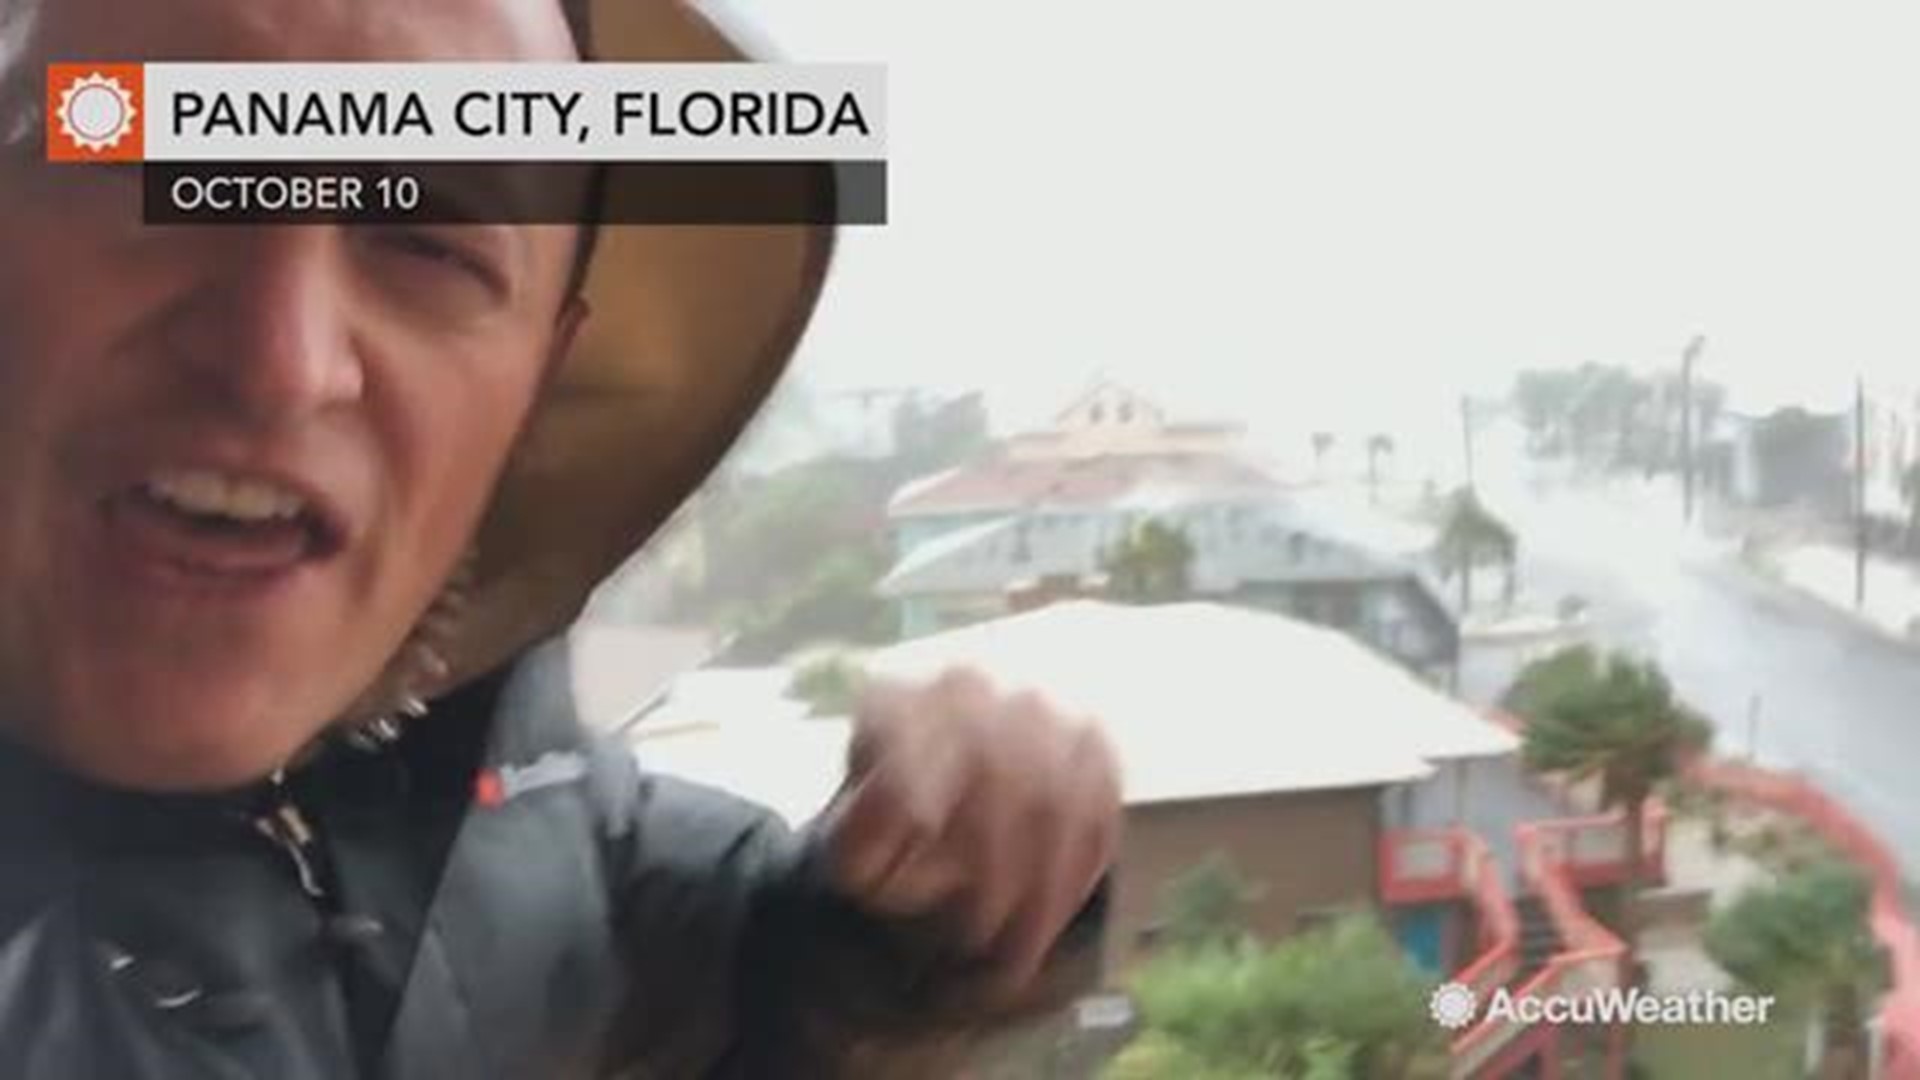 AccuWeather's Jonathan Petramala films as shingles are ripped from their roofs as Hurricane Michael's eyewall tears through Panama City, Florida.